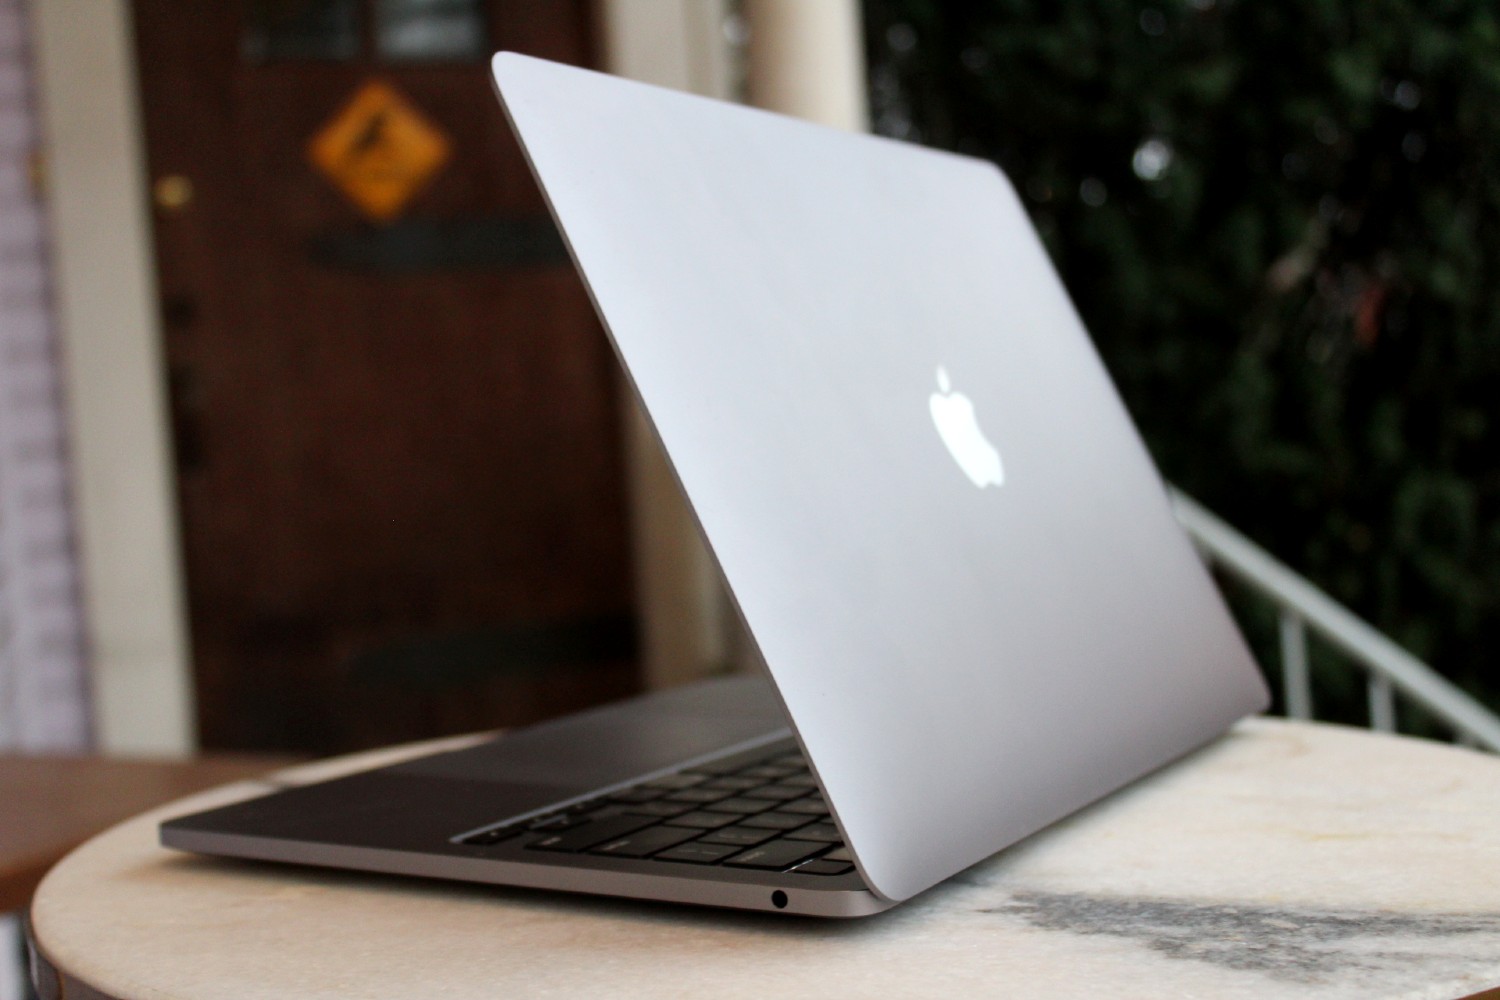 Apple's MacBook Air M1 is back on sale for $750